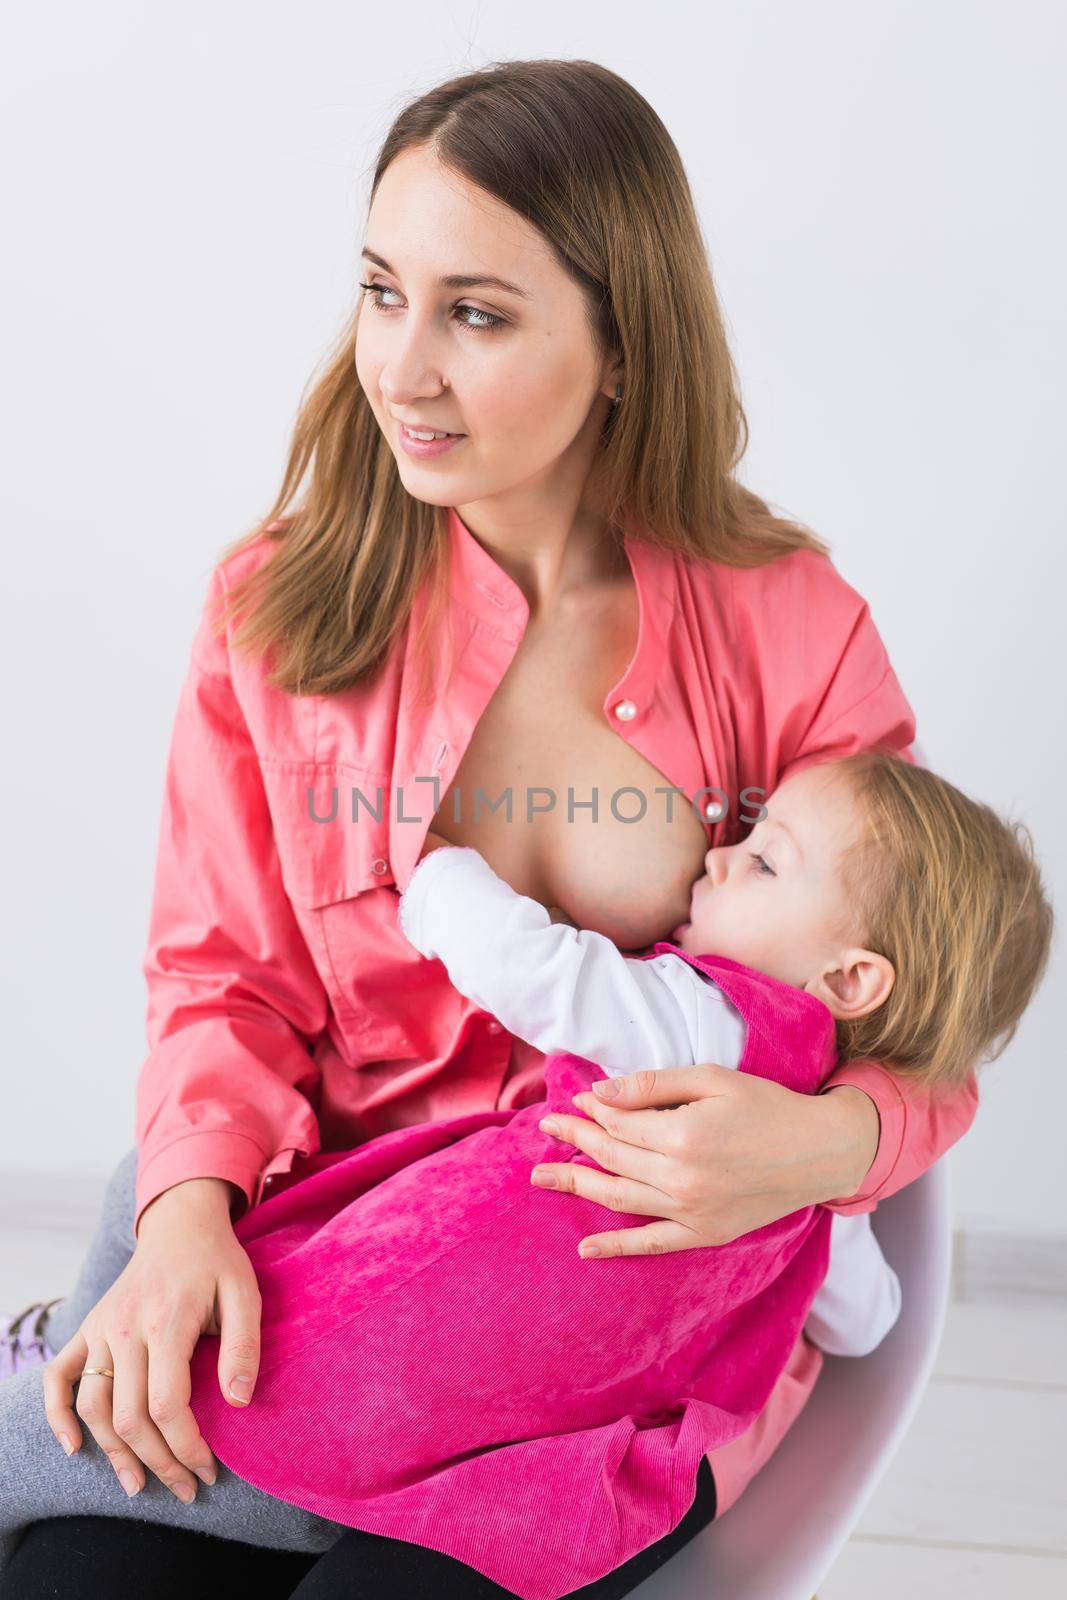 Motherhood and family concept - mother breast feeding and hugging her baby. by Satura86